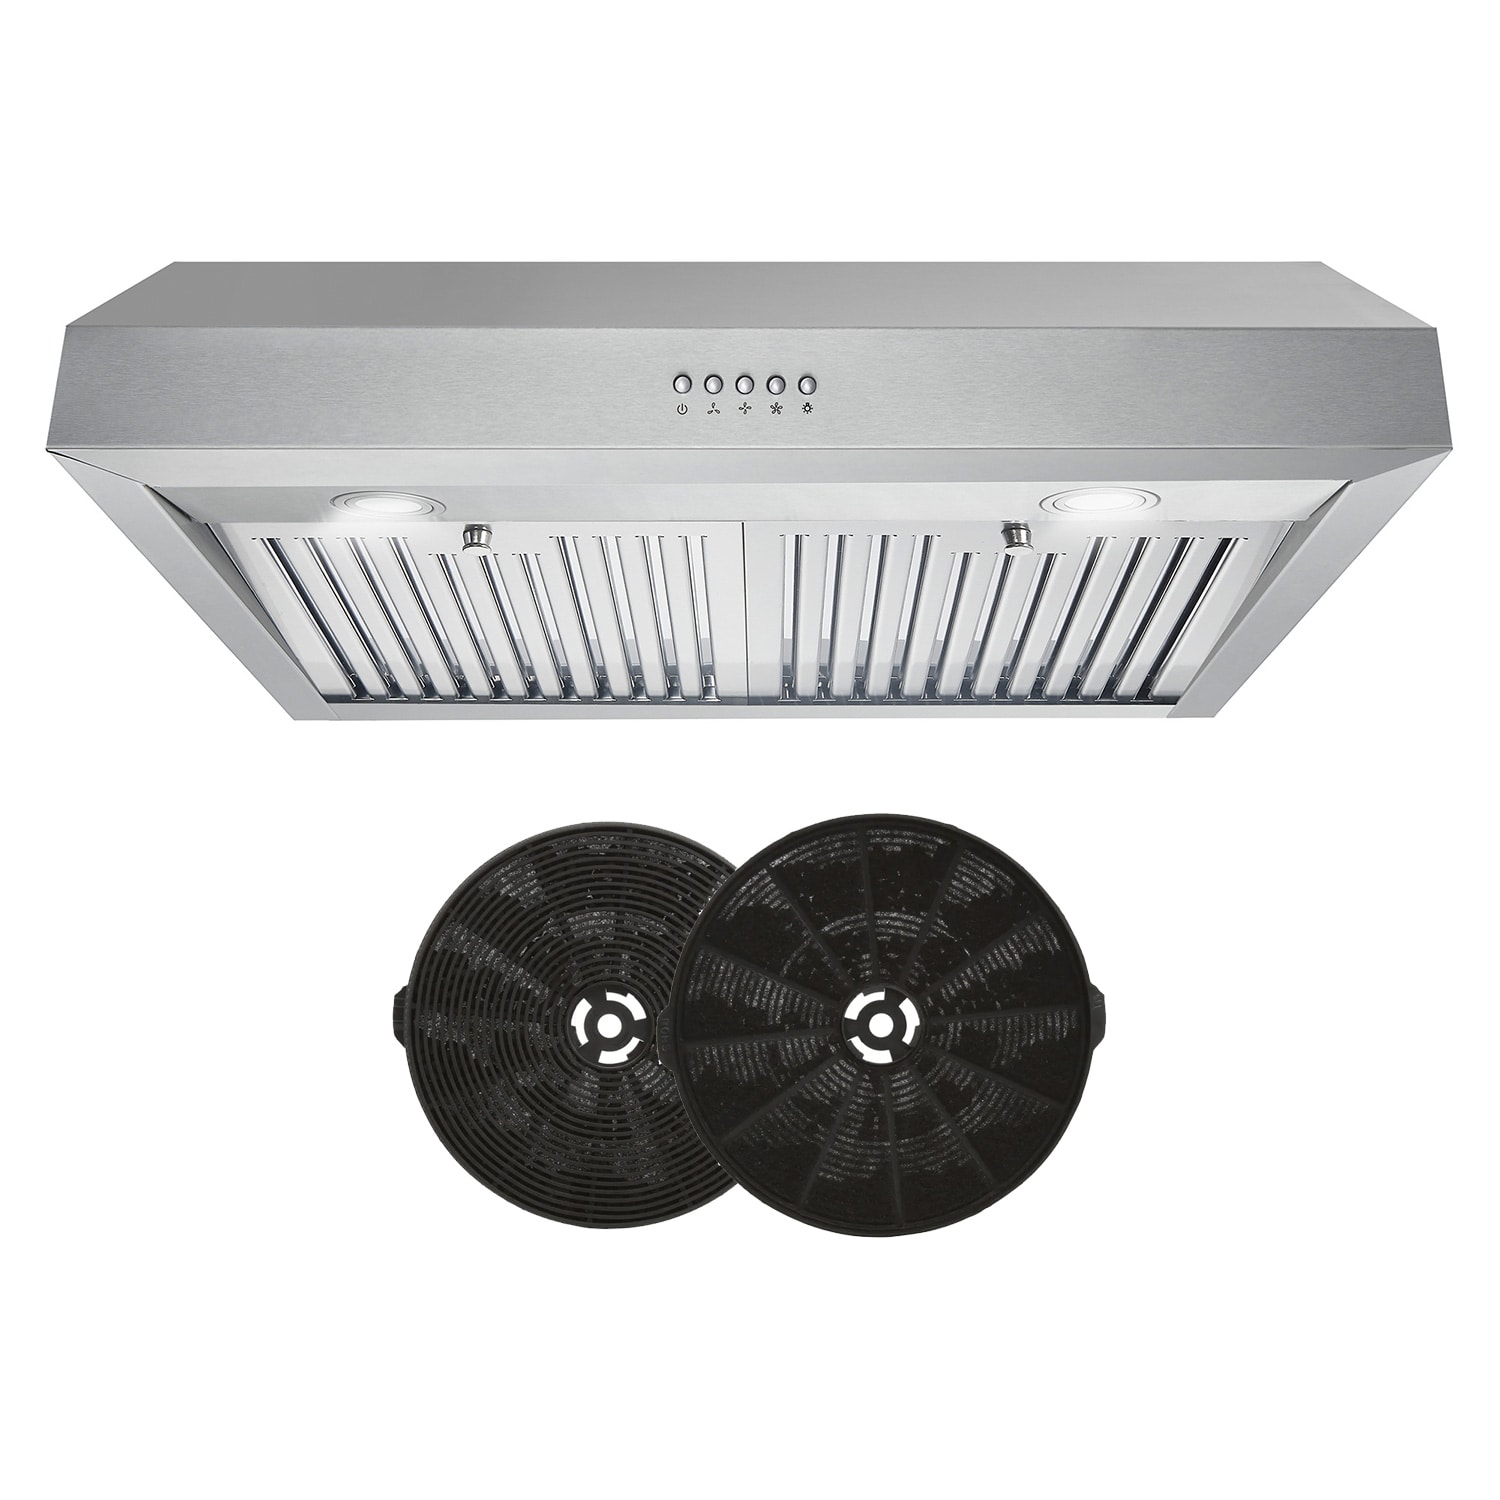 Cosmo 30 380 CFM Ductless Under Cabinet Range Hood in Stainless Steel - UC30-DL